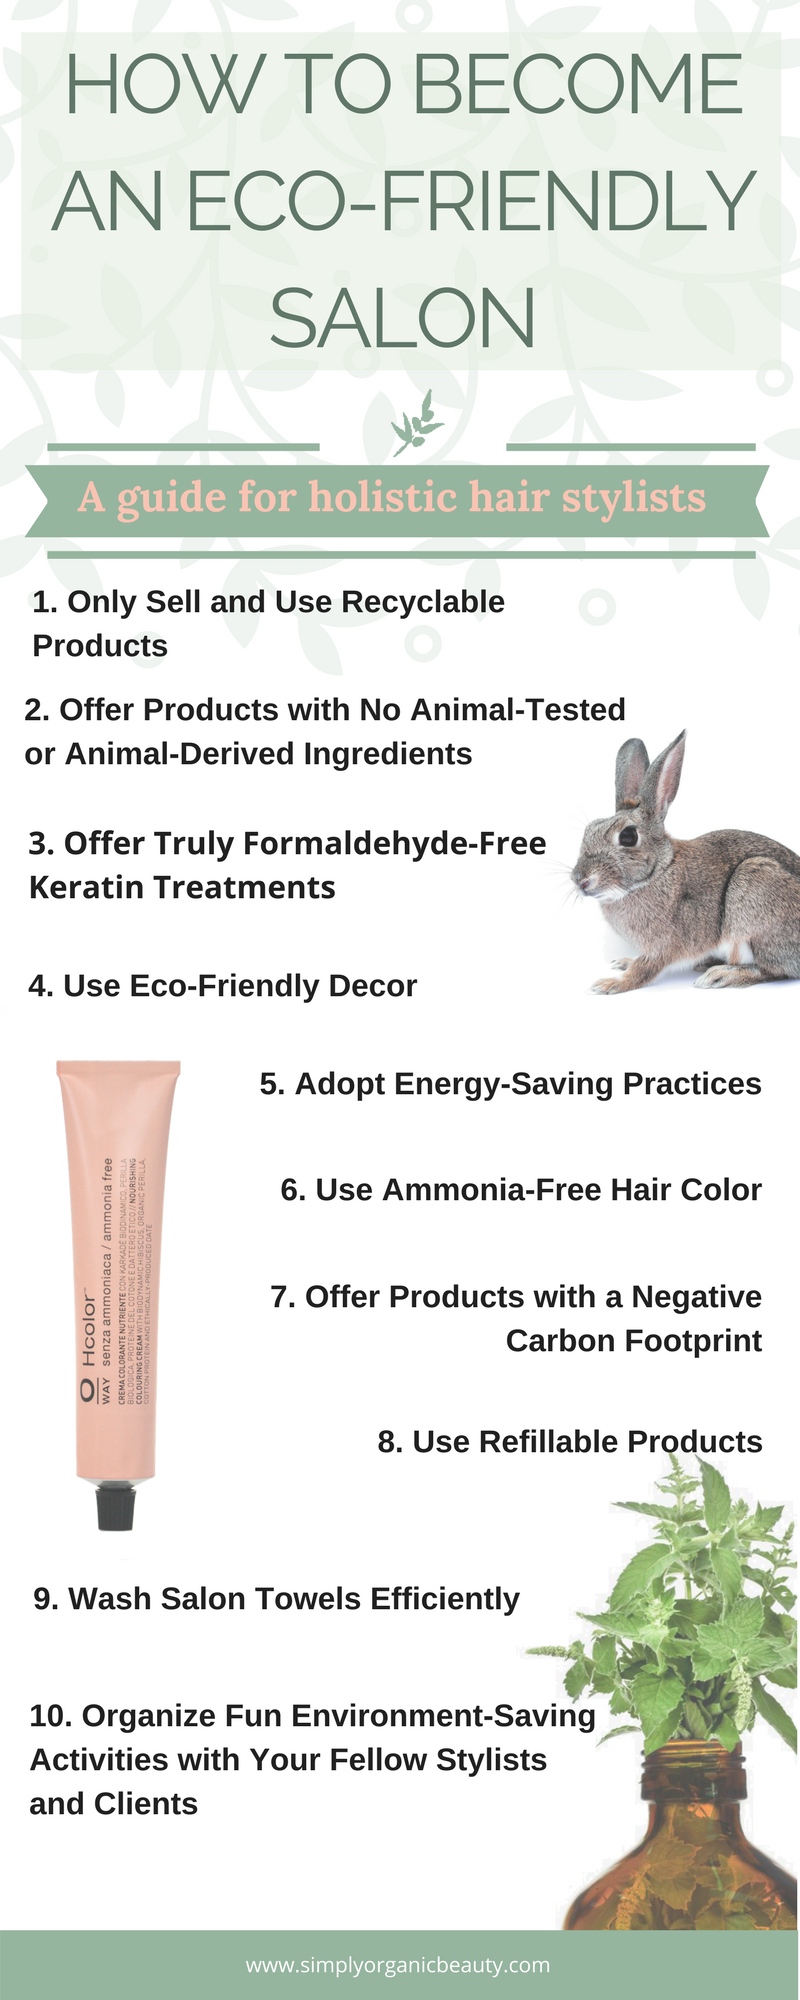 10 Ways to Become an Eco-Friendly Salon | Simply Organic Beauty - 10 Ways to Become an Eco-Friendly Salon | Simply Organic Beauty -   18 beauty Care salon ideas